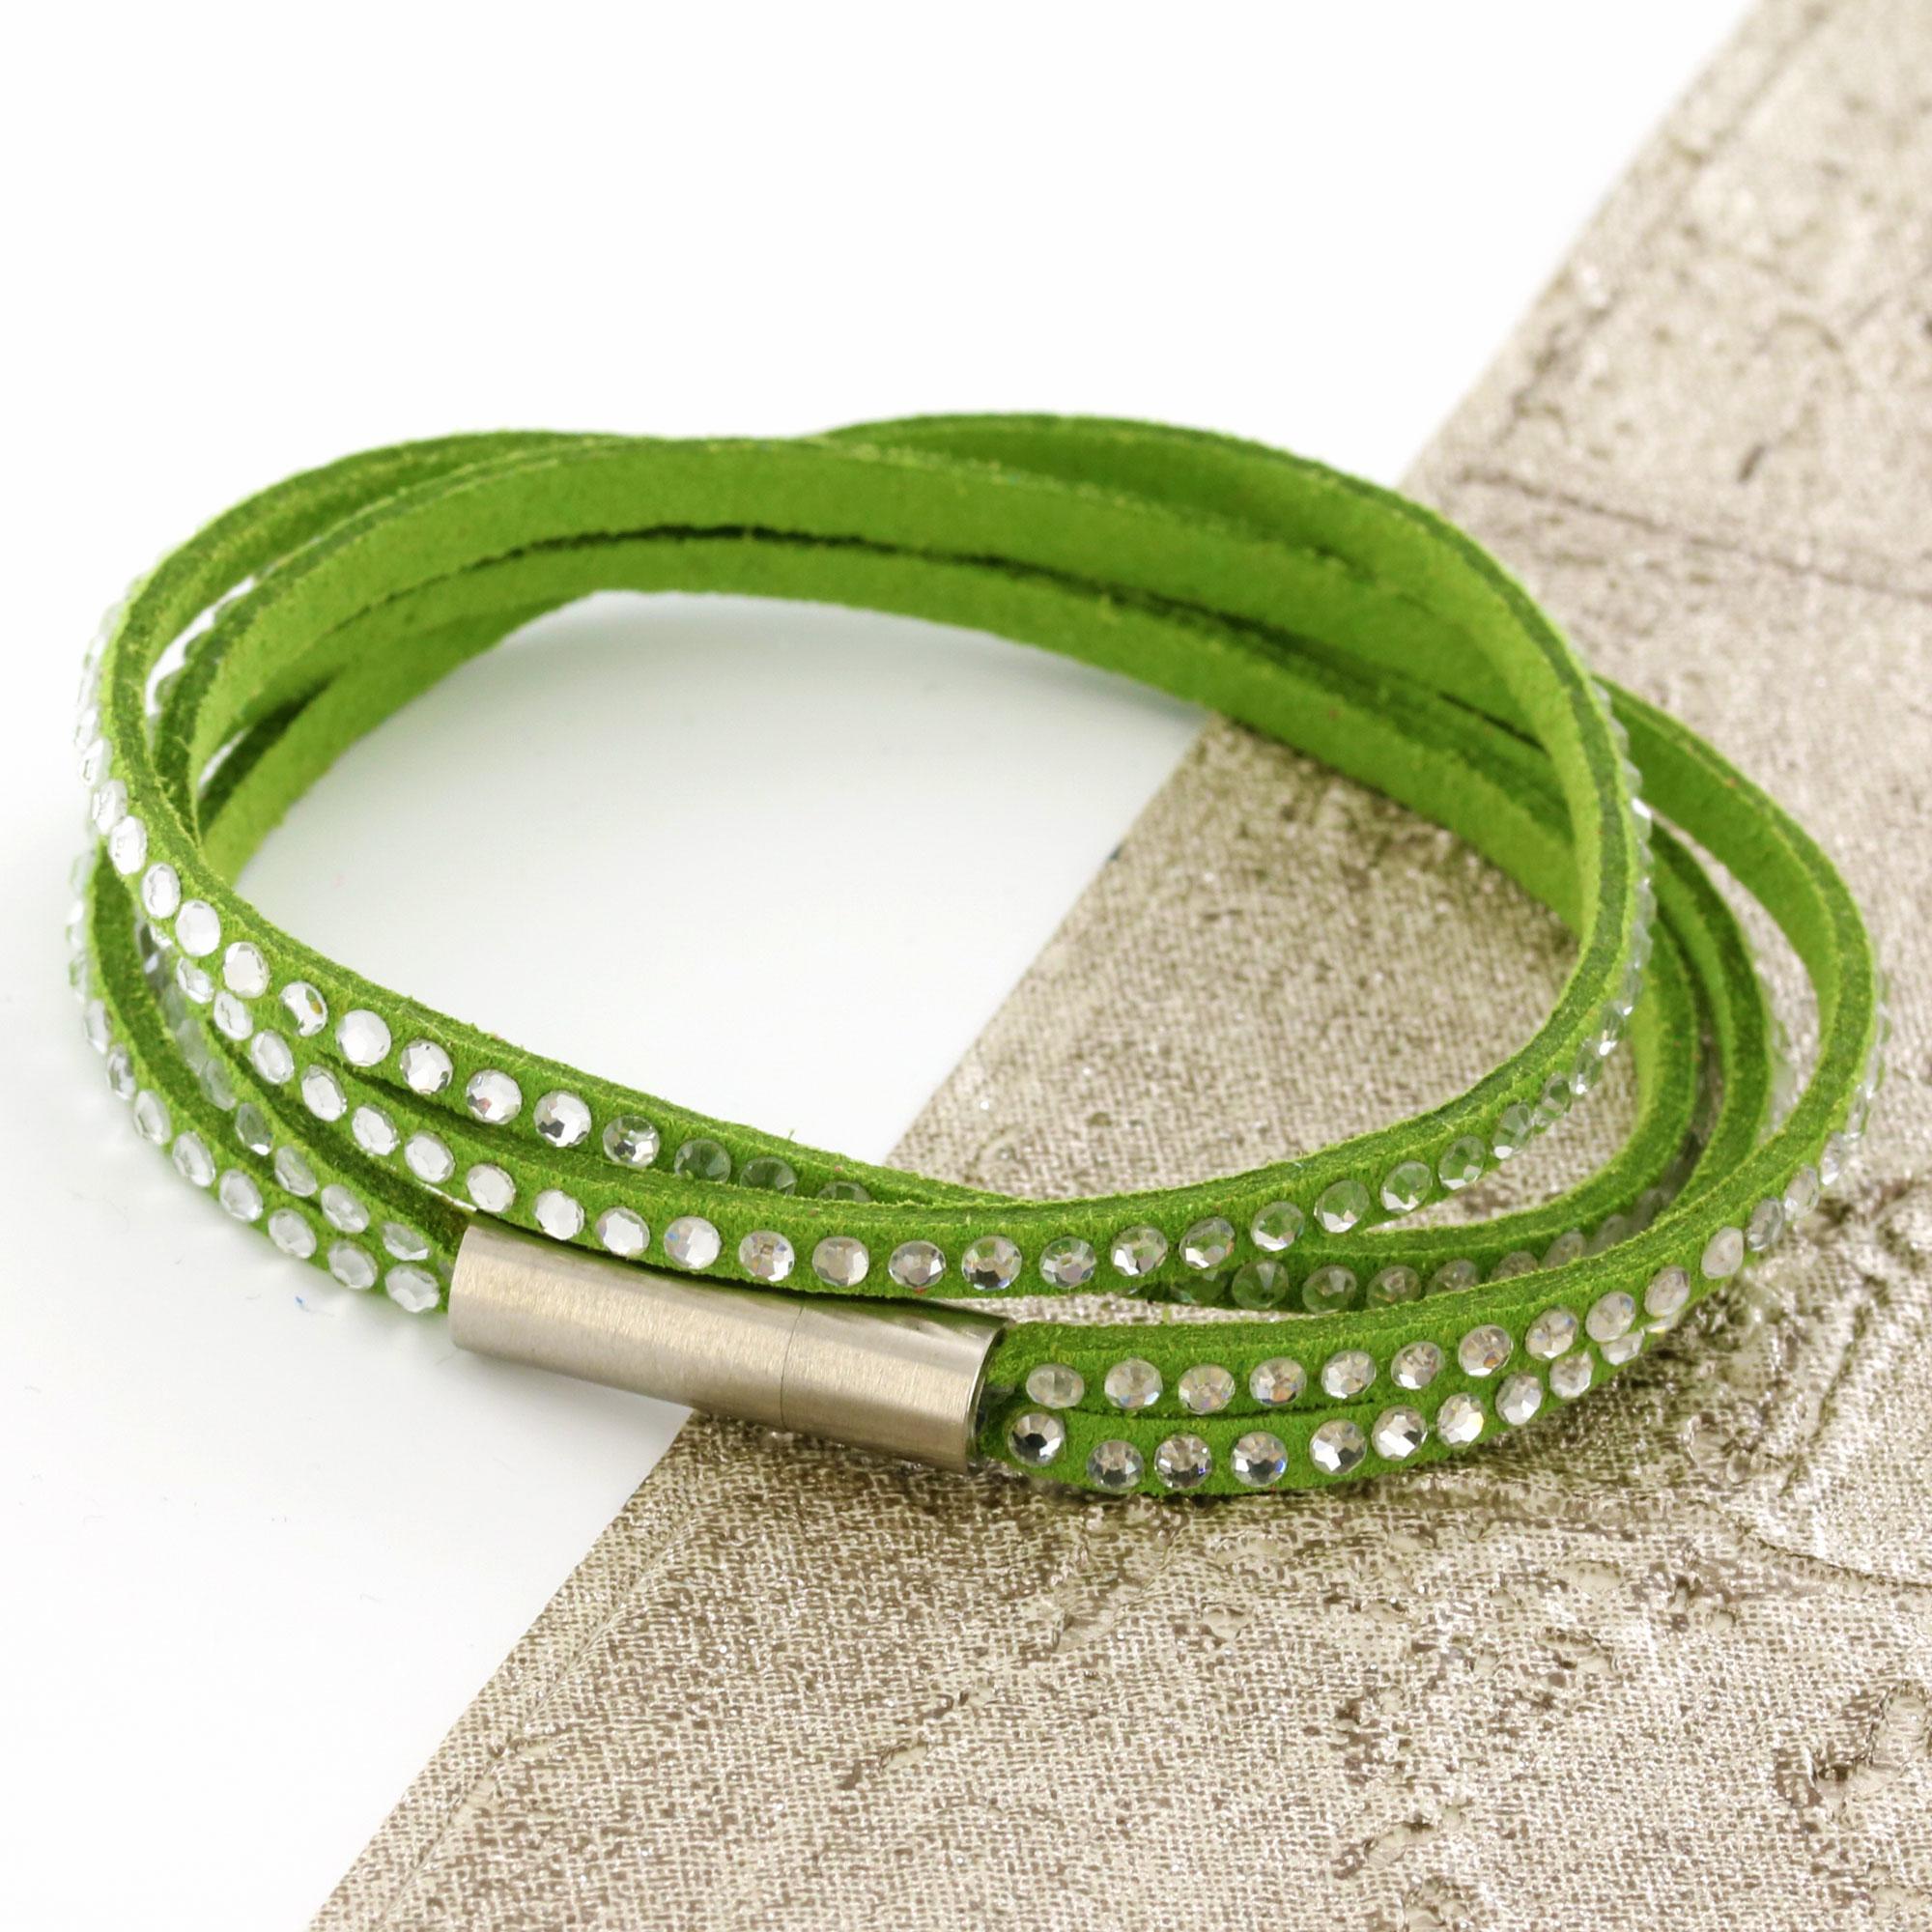 Green Womens Stacker Leather Beaded Bracelet, Multi Row Layer Stack Wristband